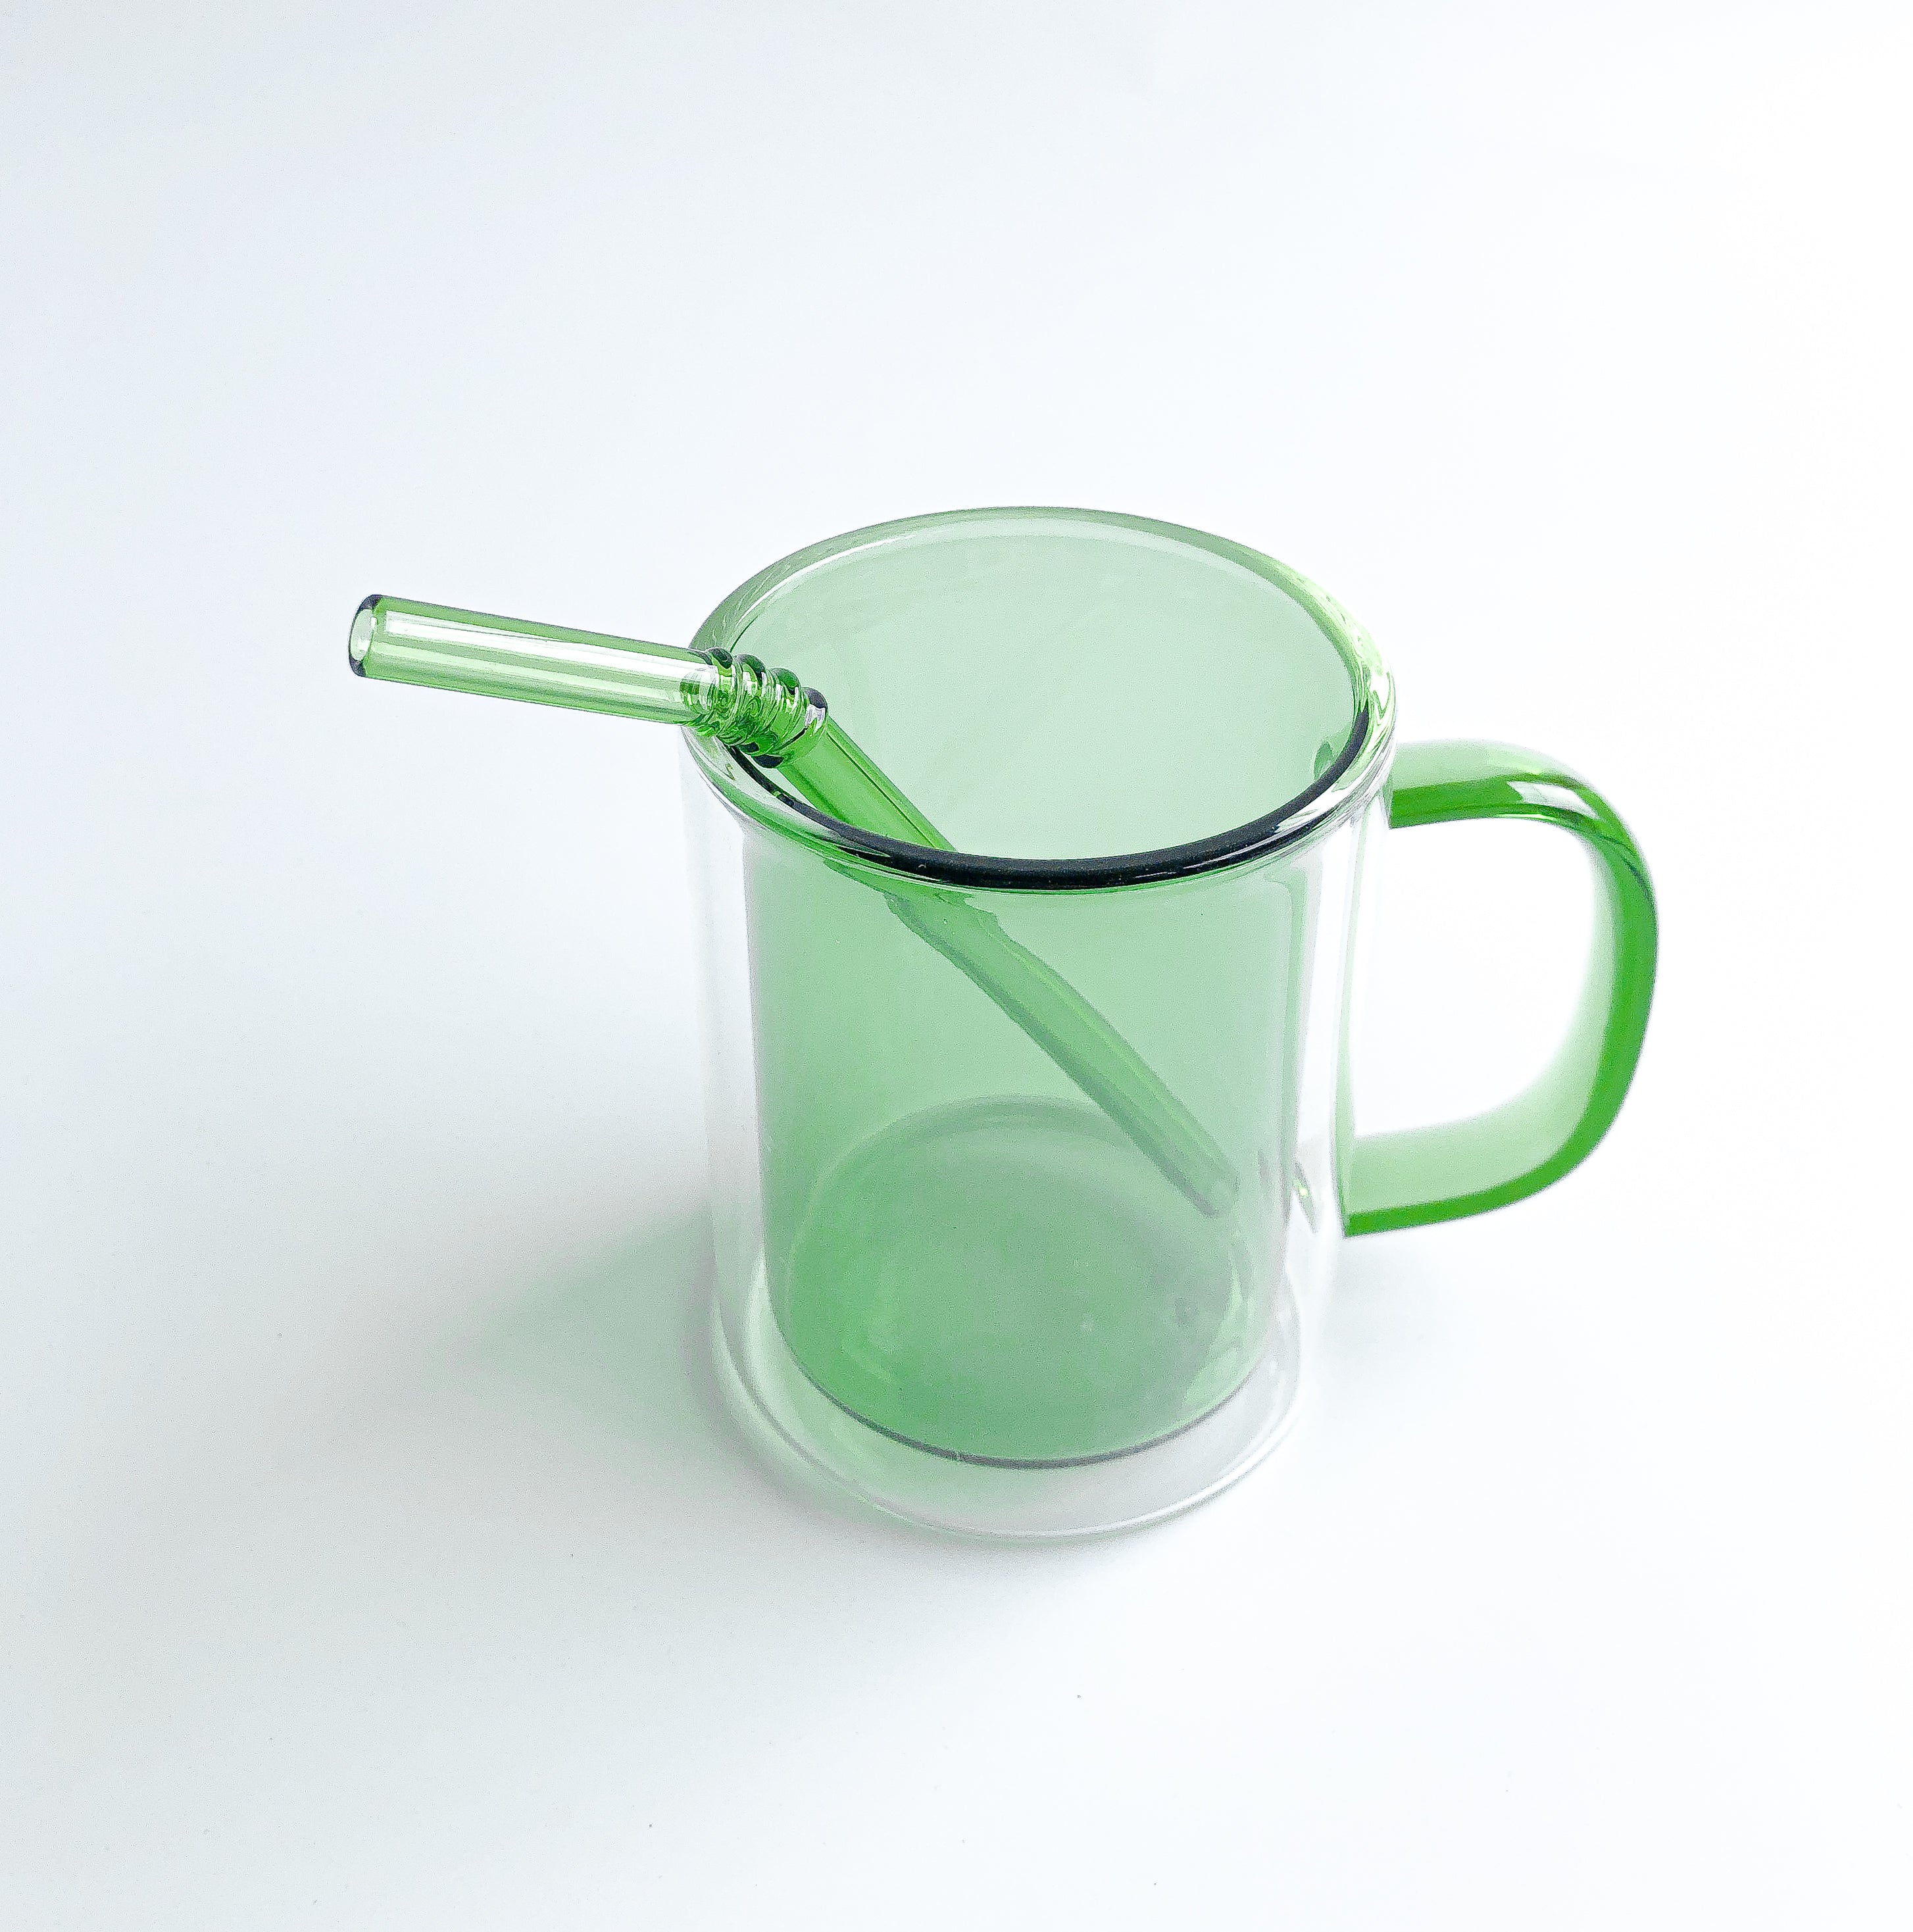 Sippy Straw Set by PROSE Tabletop